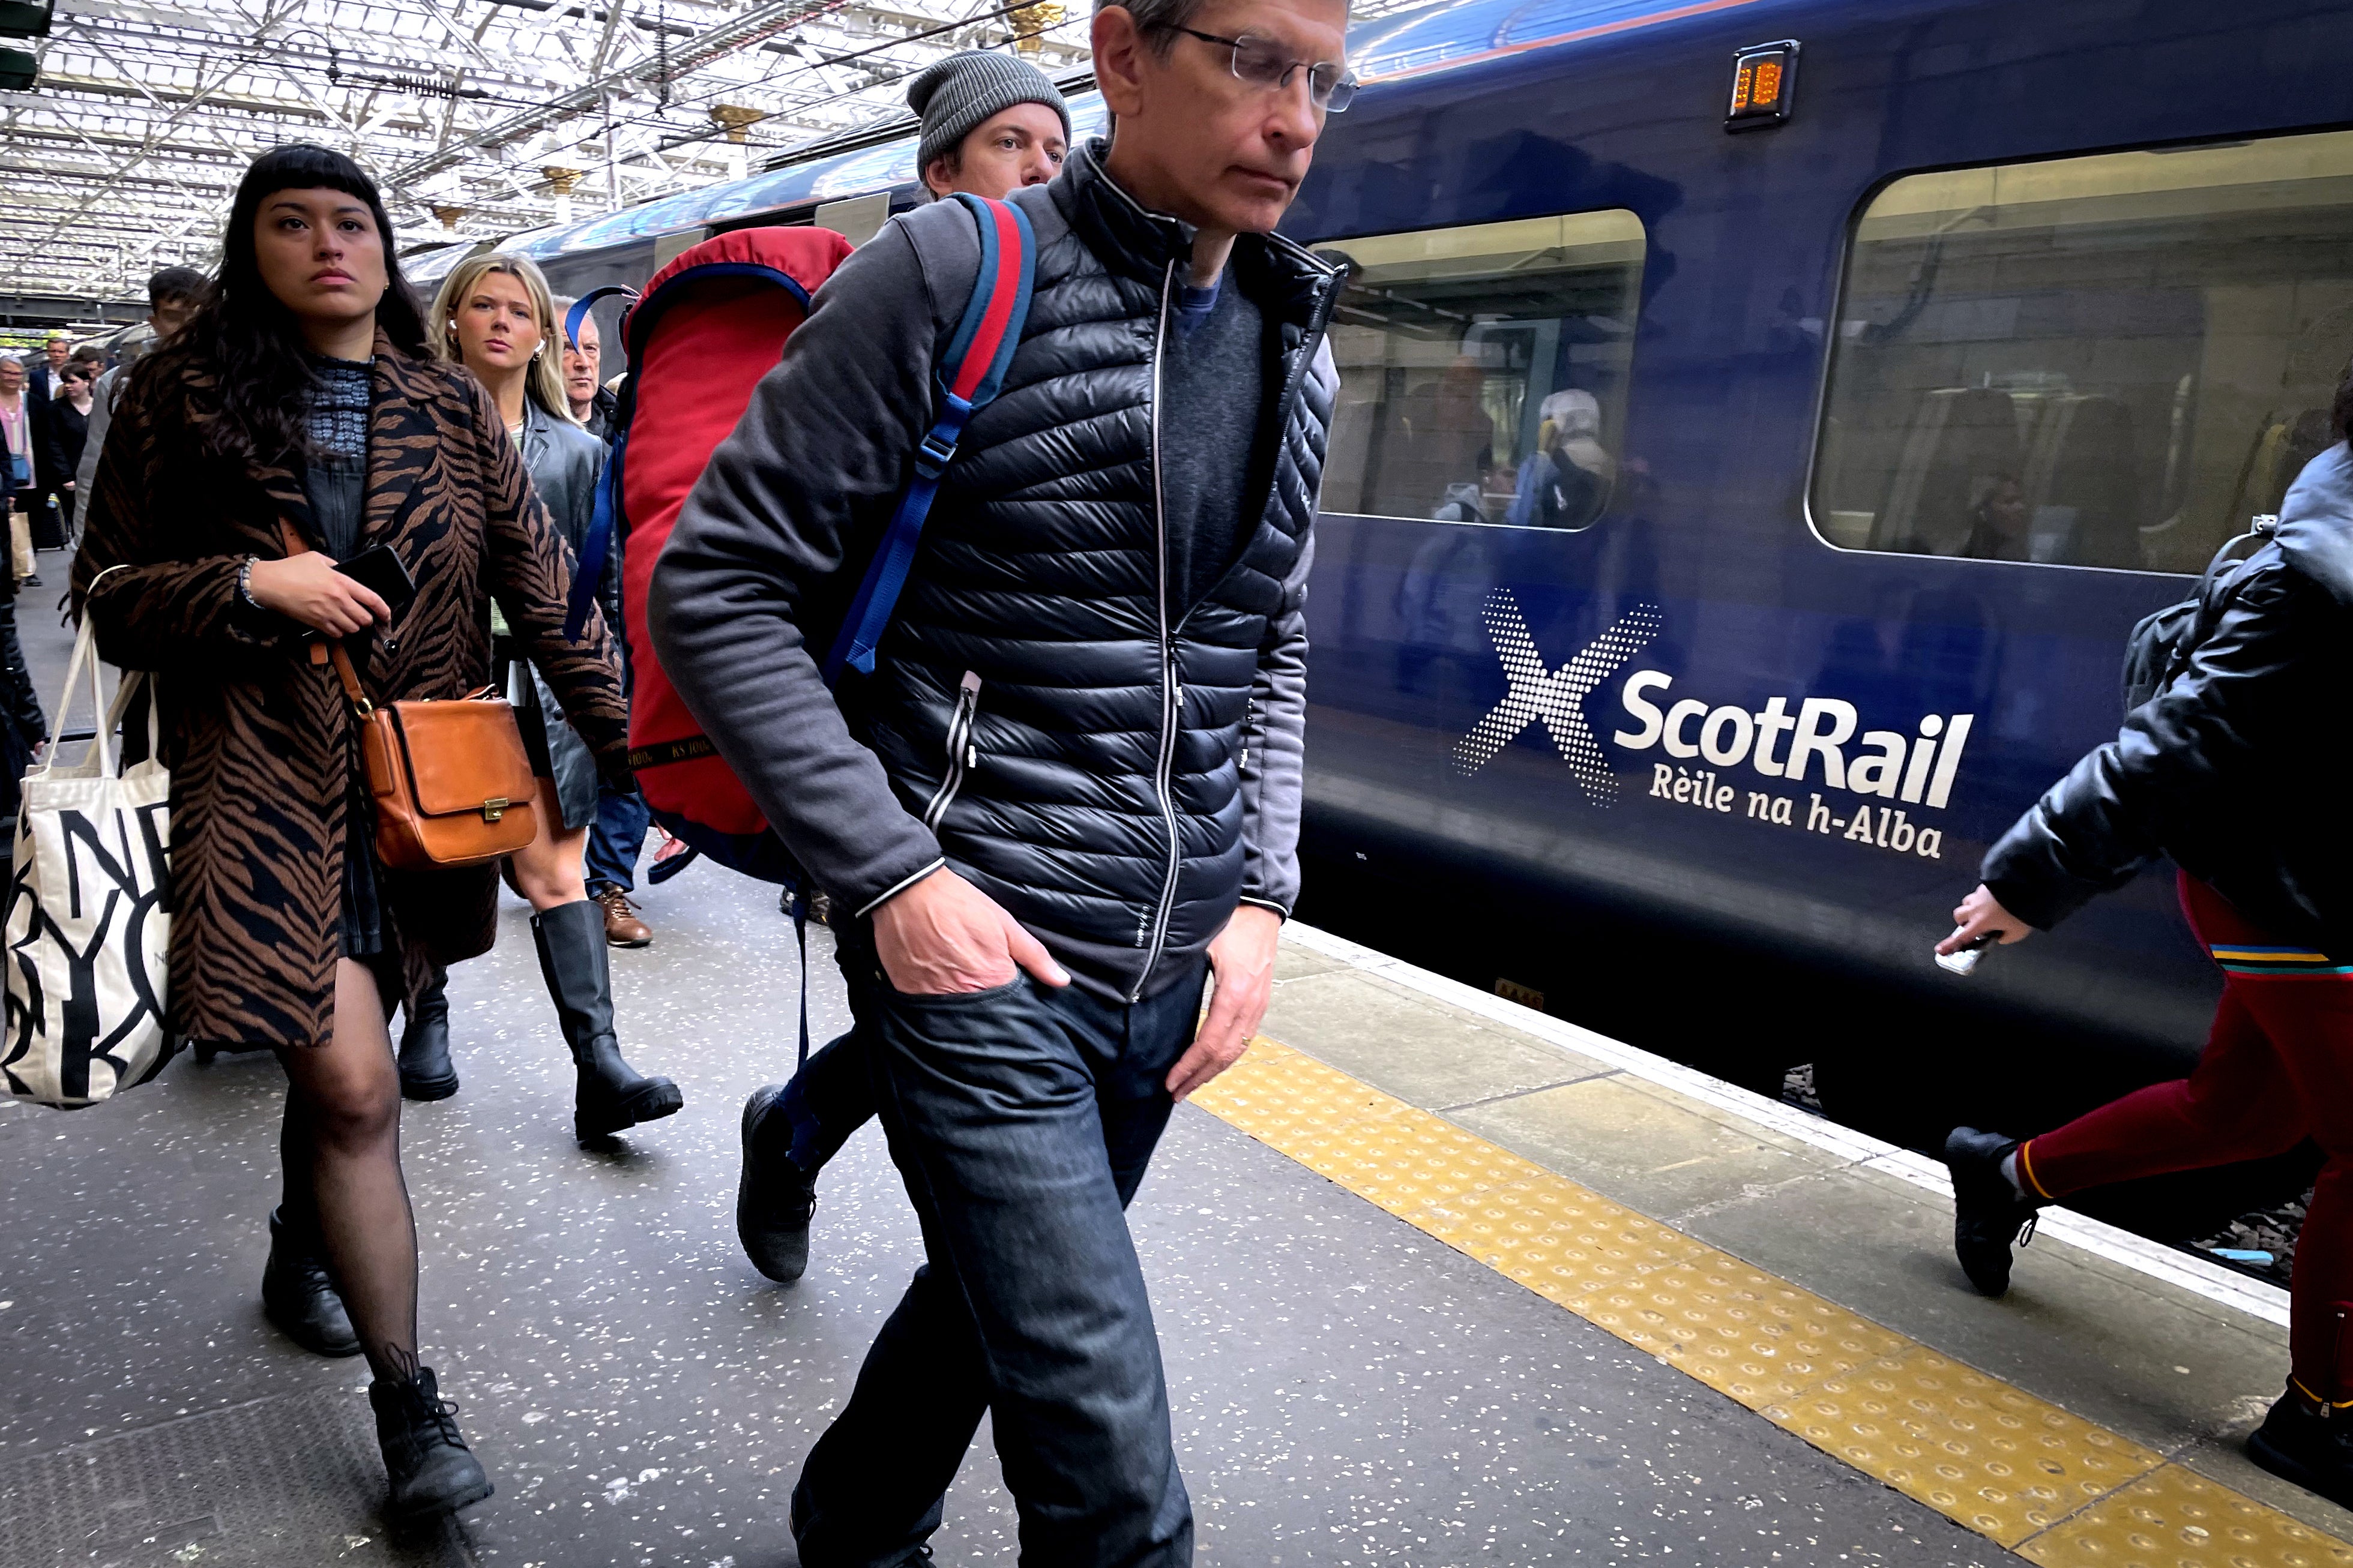 Fewer than one in 10 ScotRail services will run on Wednesday as a result of a strike by Network Rail staff, the train operator said. (Jane Barlow/PA)